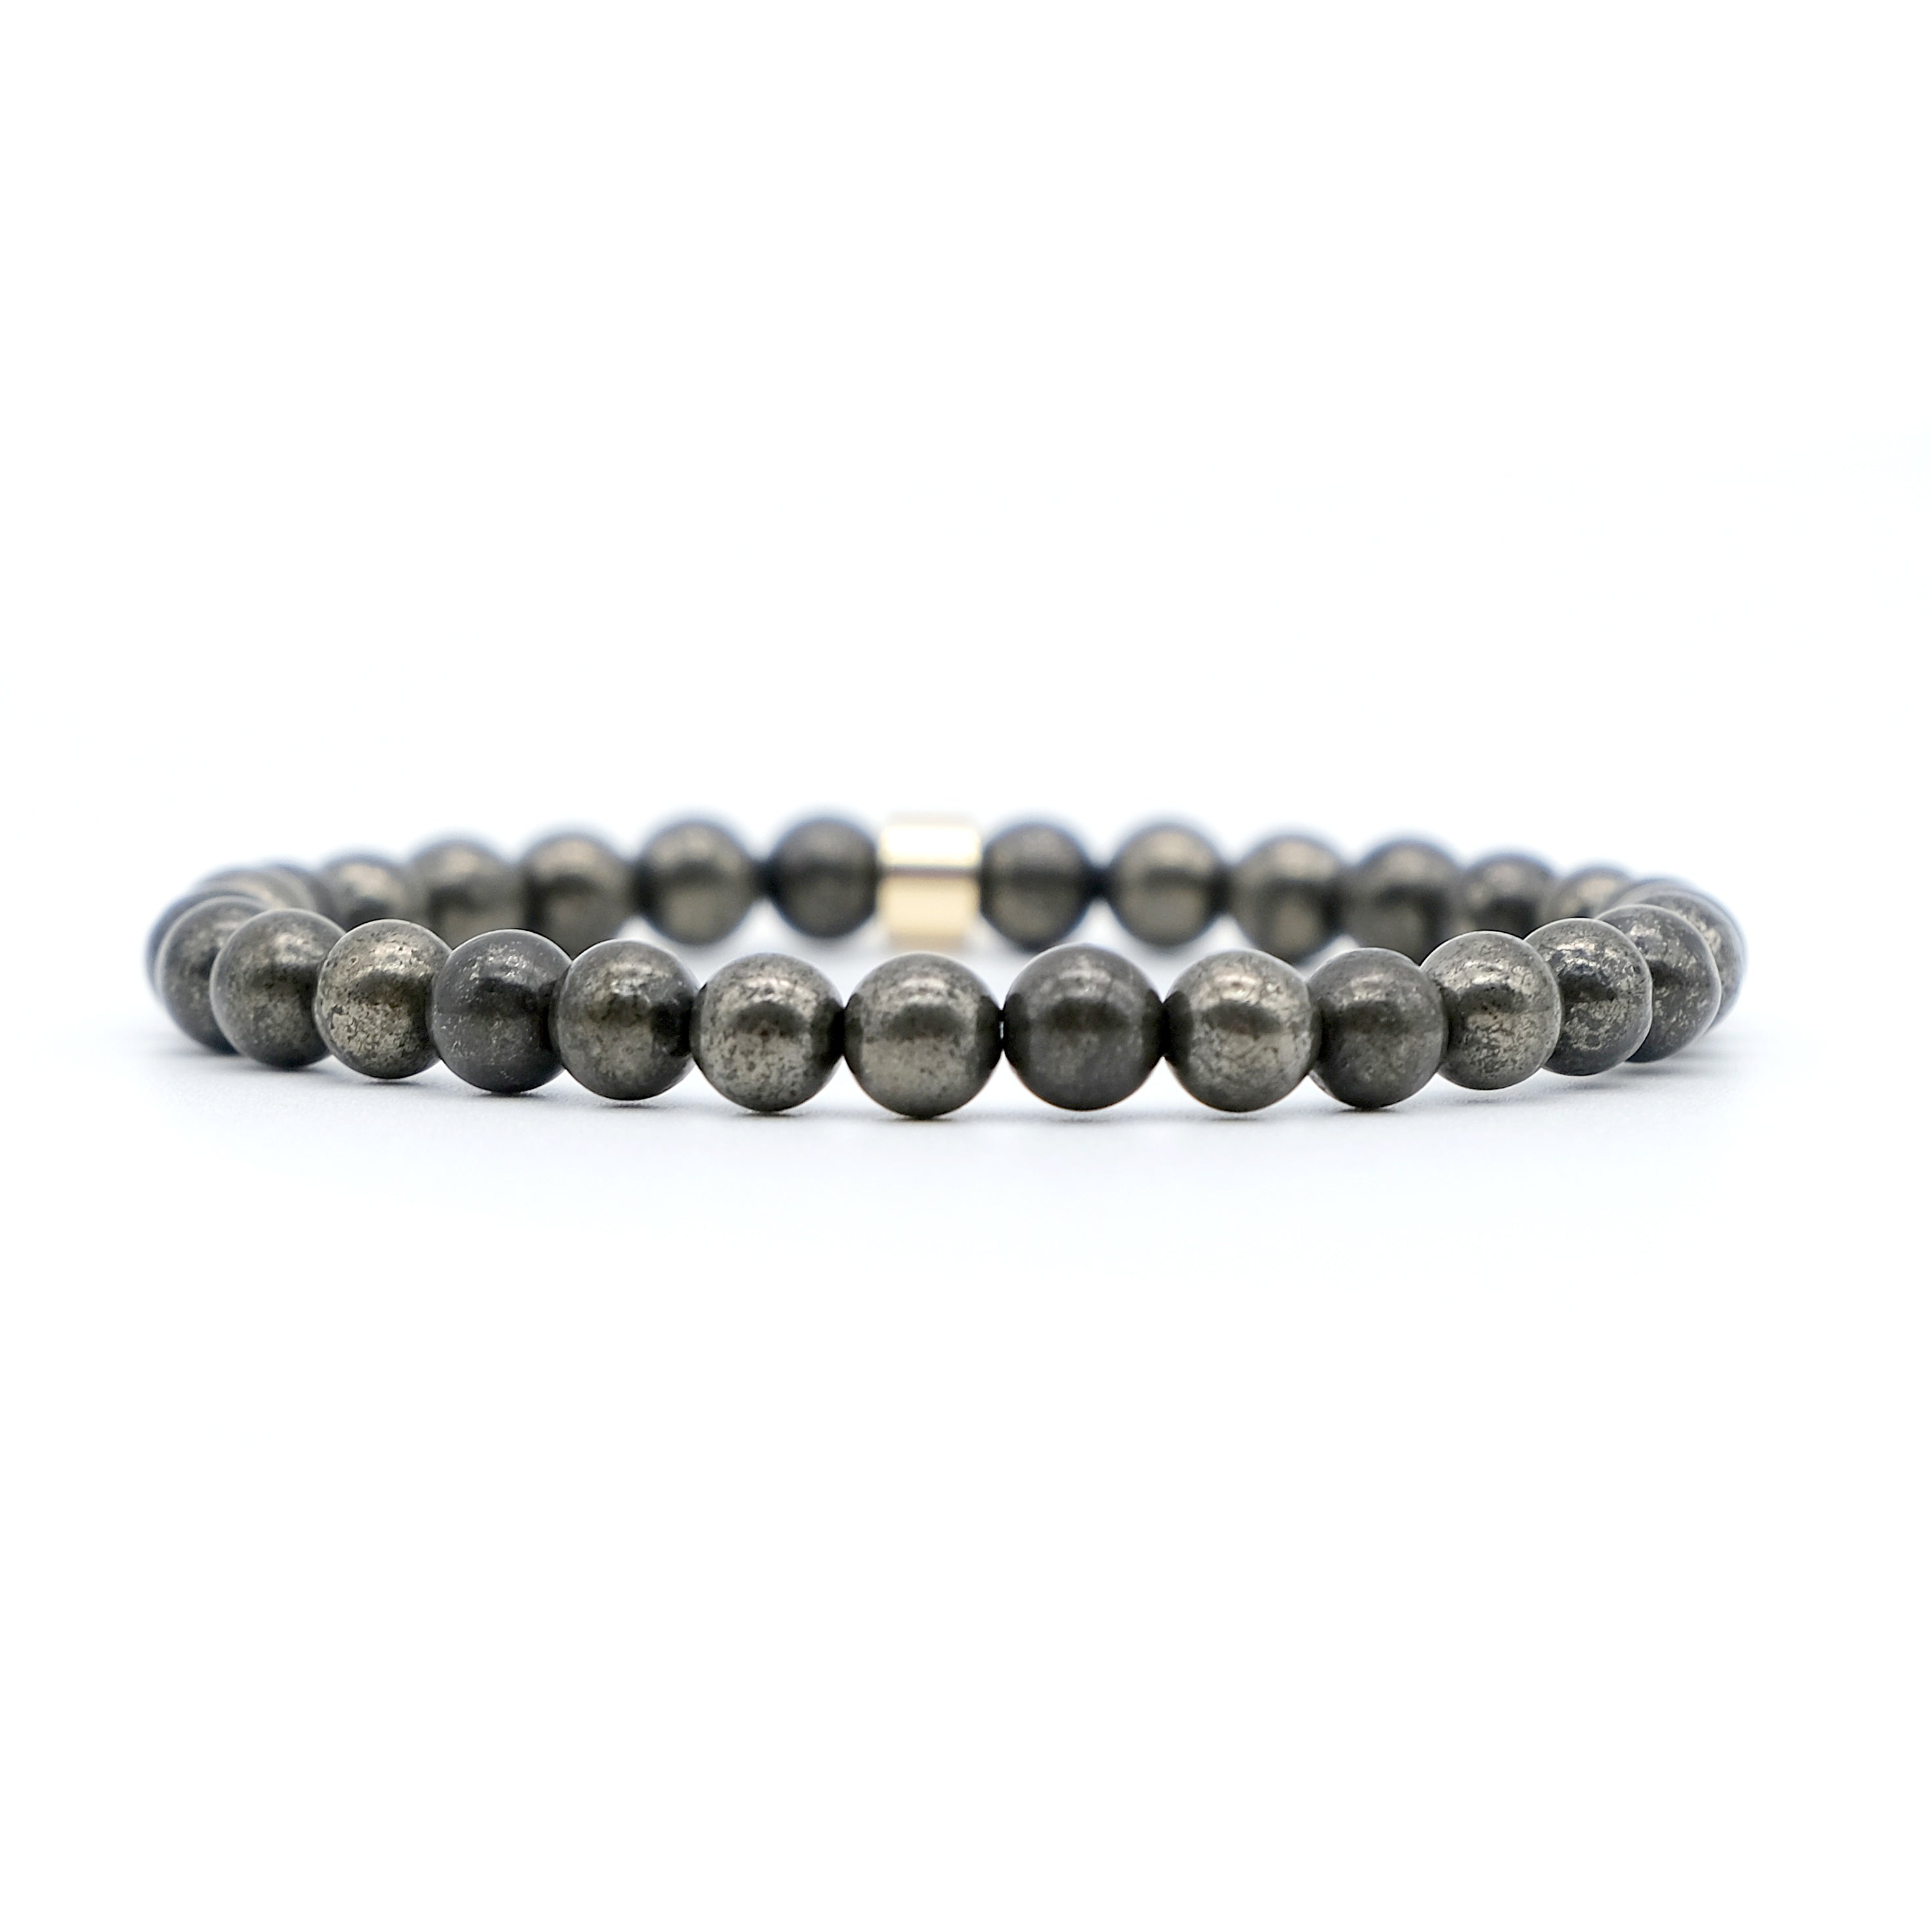 A pyrite gemstone bracelet in 5mm beads with gold plated accessory